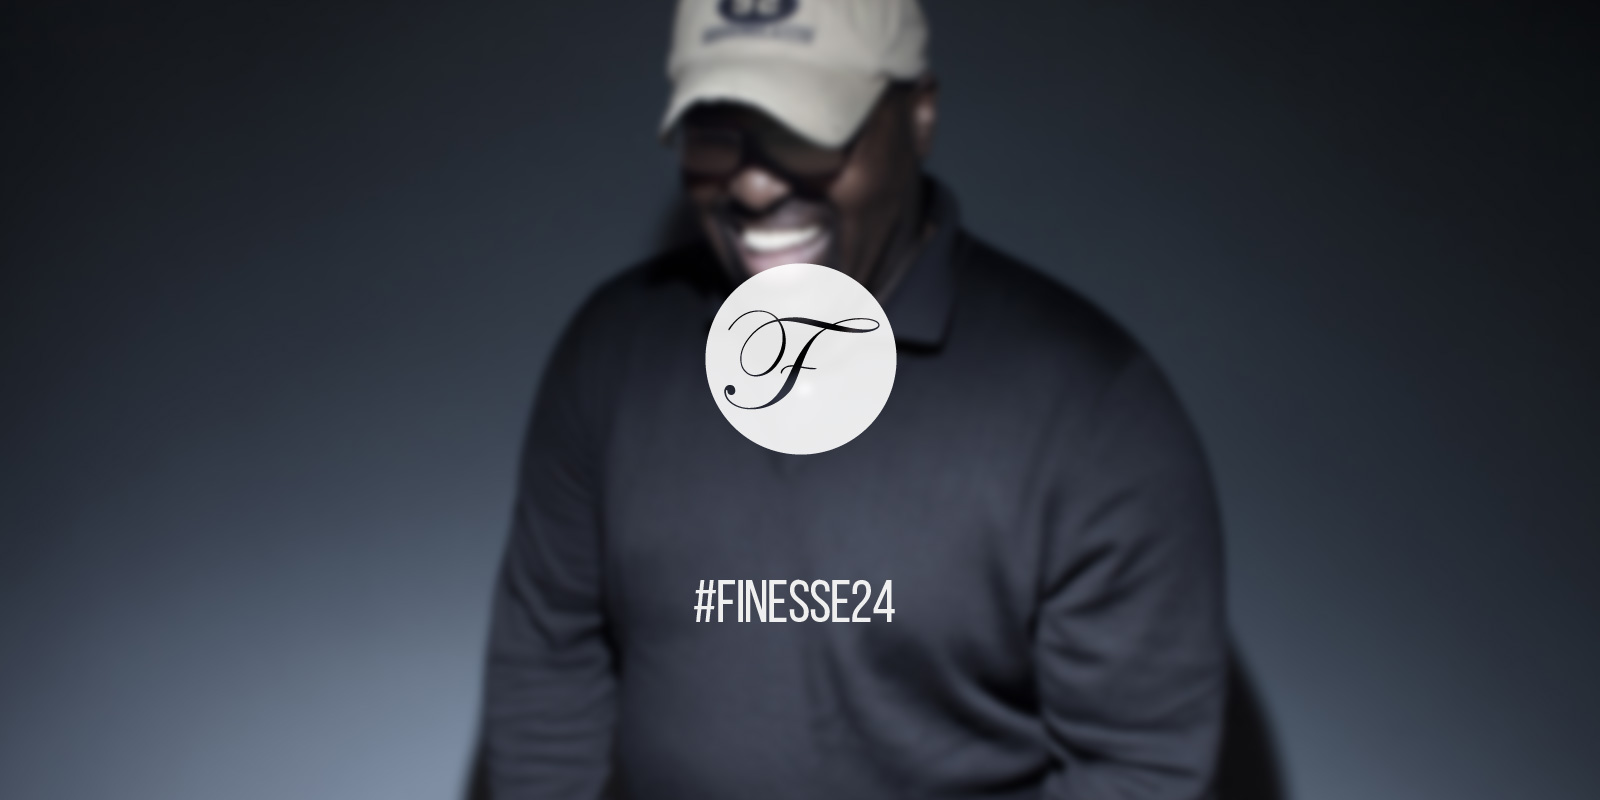 House Finesse 24 including Frankie Knuckles Tribute